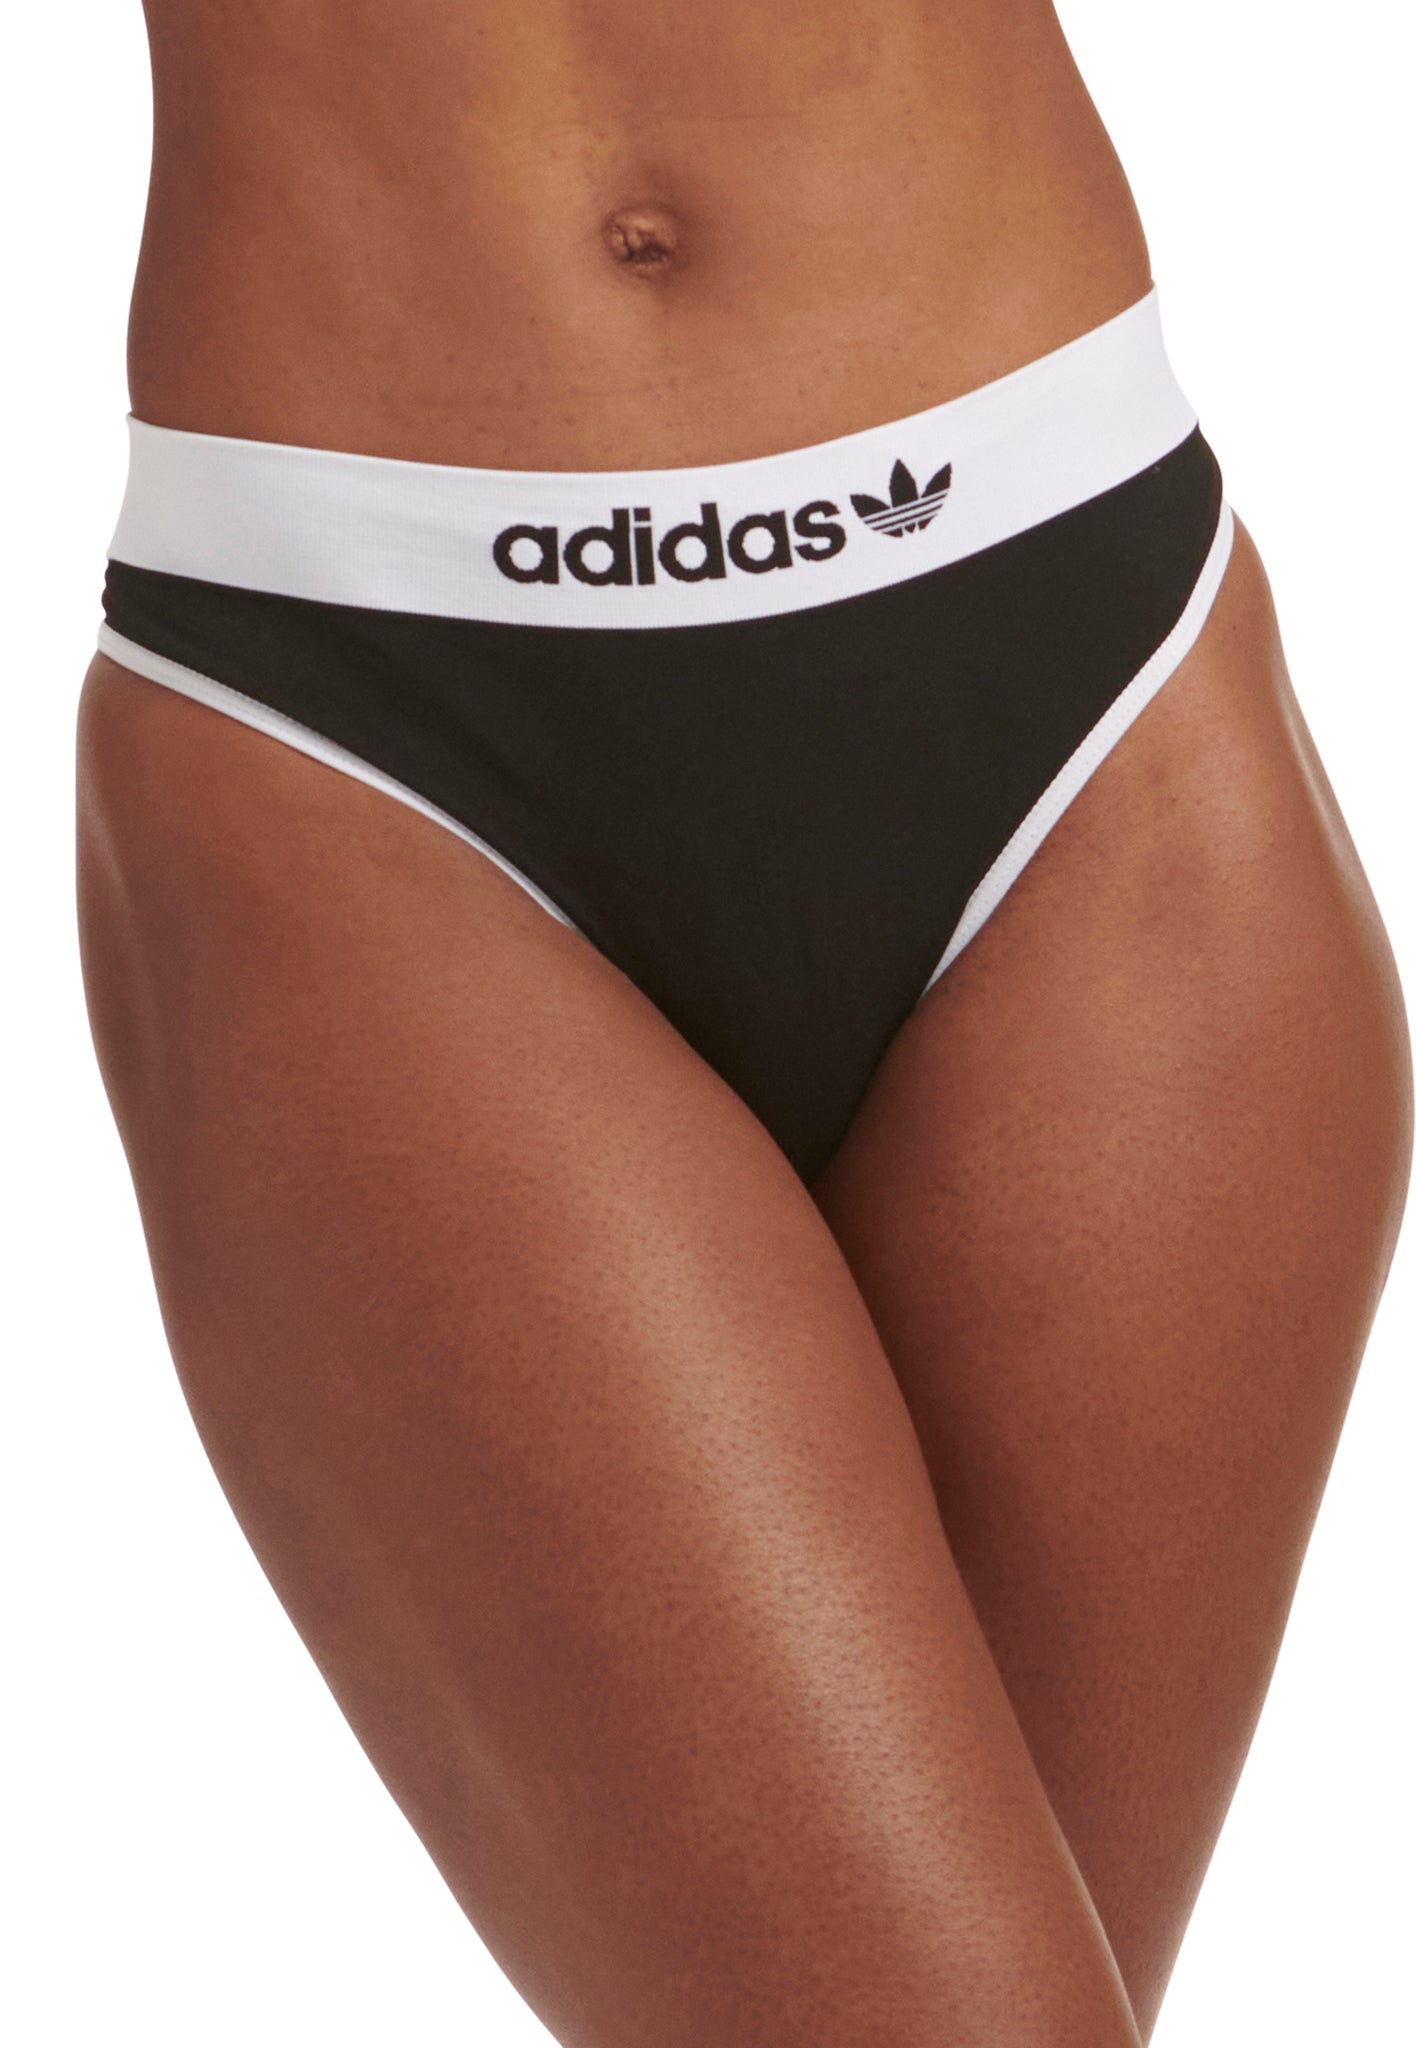 adidas Women's Seamless Hipster Underwear (1-Pack), Ratio Print Black/Matte  Silver, MEDIUM,  price tracker / tracking,  price history  charts,  price watches,  price drop alerts